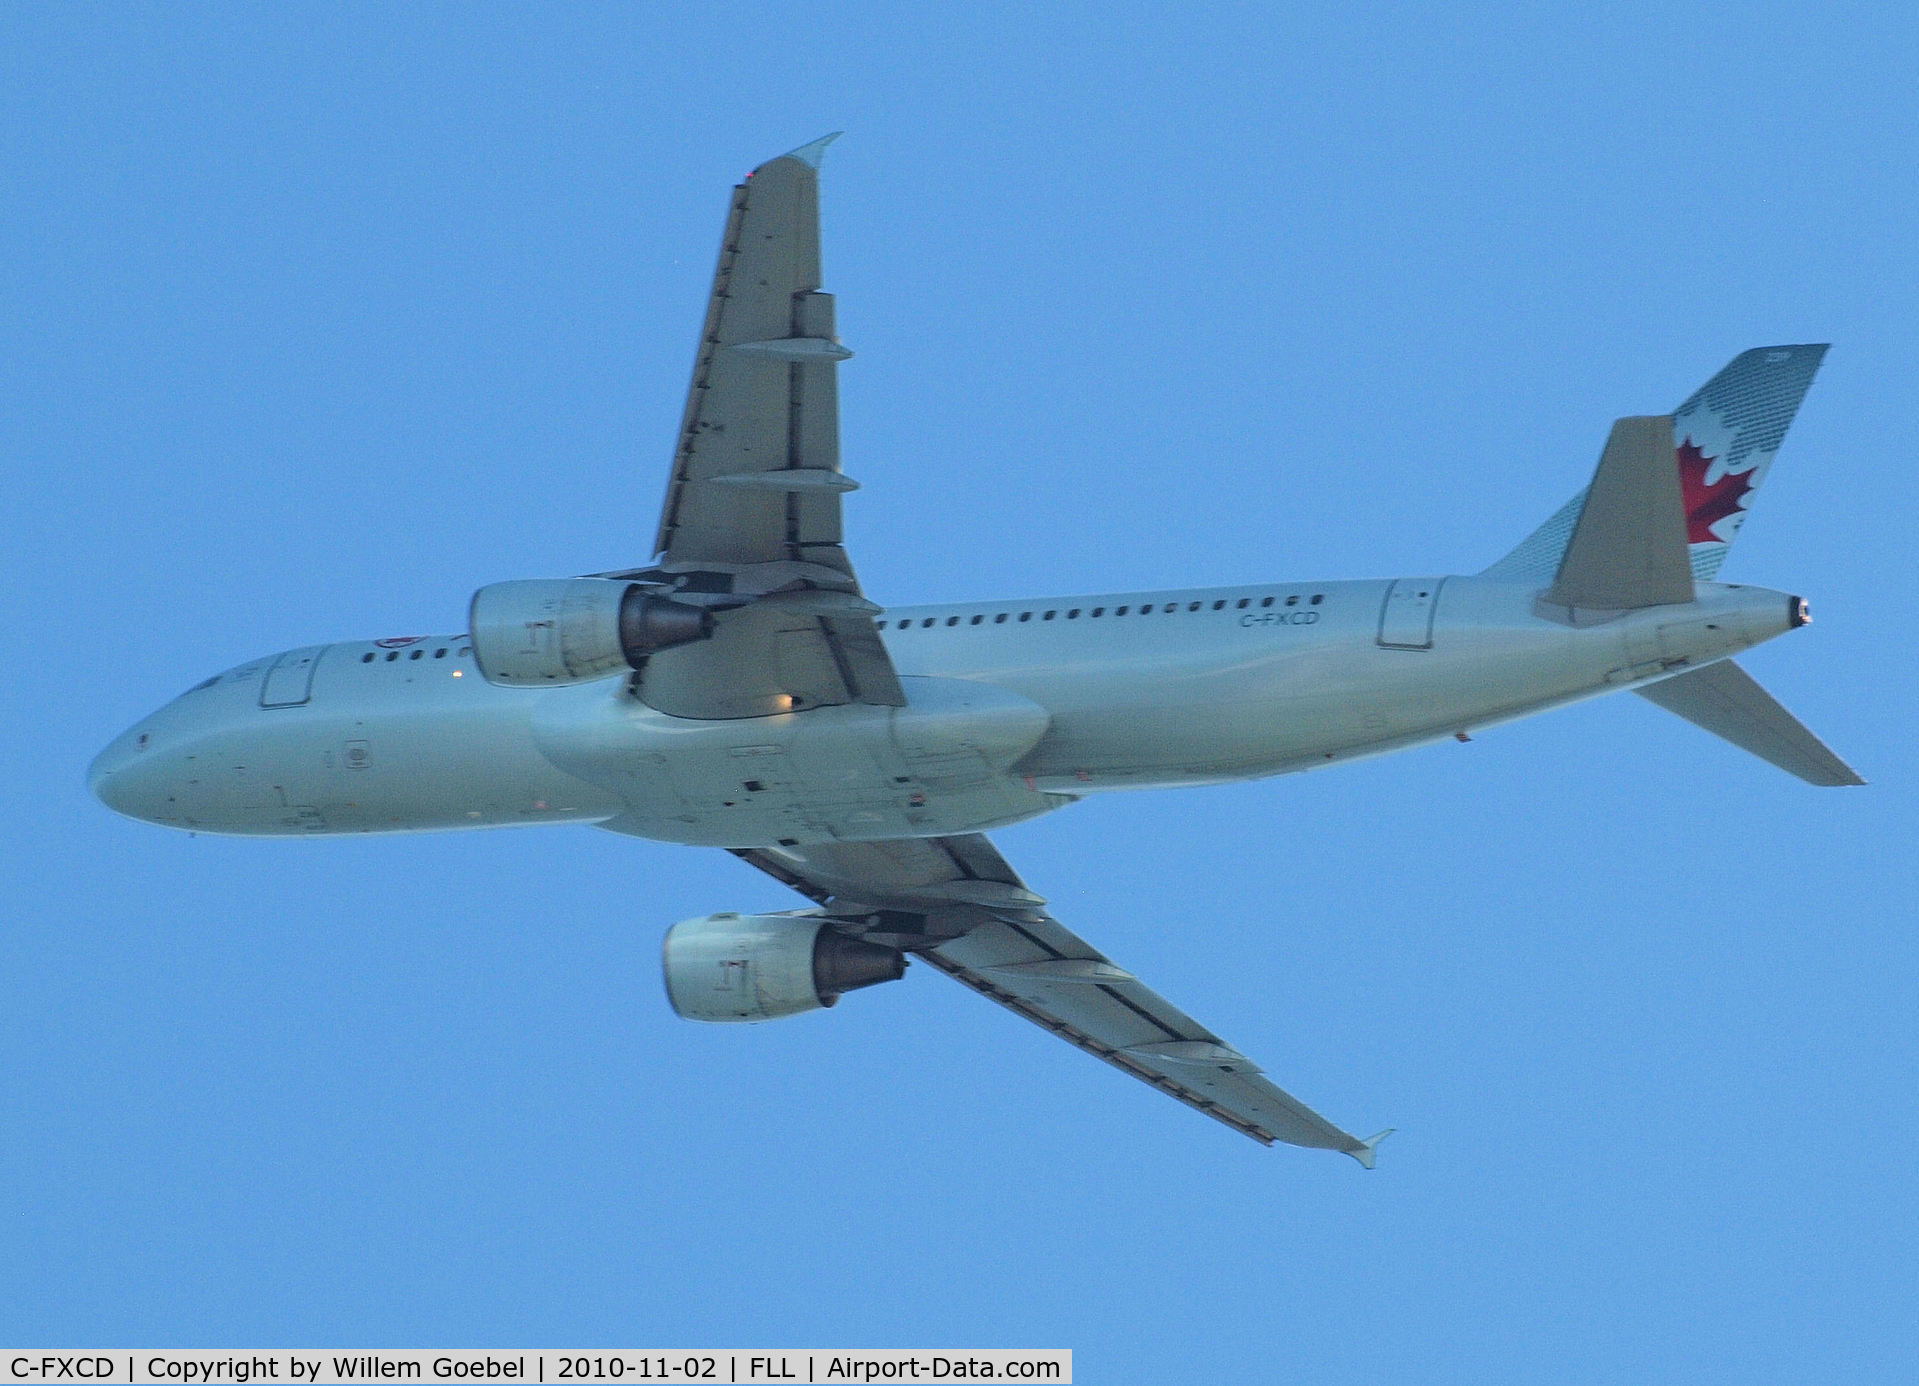 C-FXCD, 2003 Airbus A320-214 C/N 2018, Take off from Frt Lauderdale